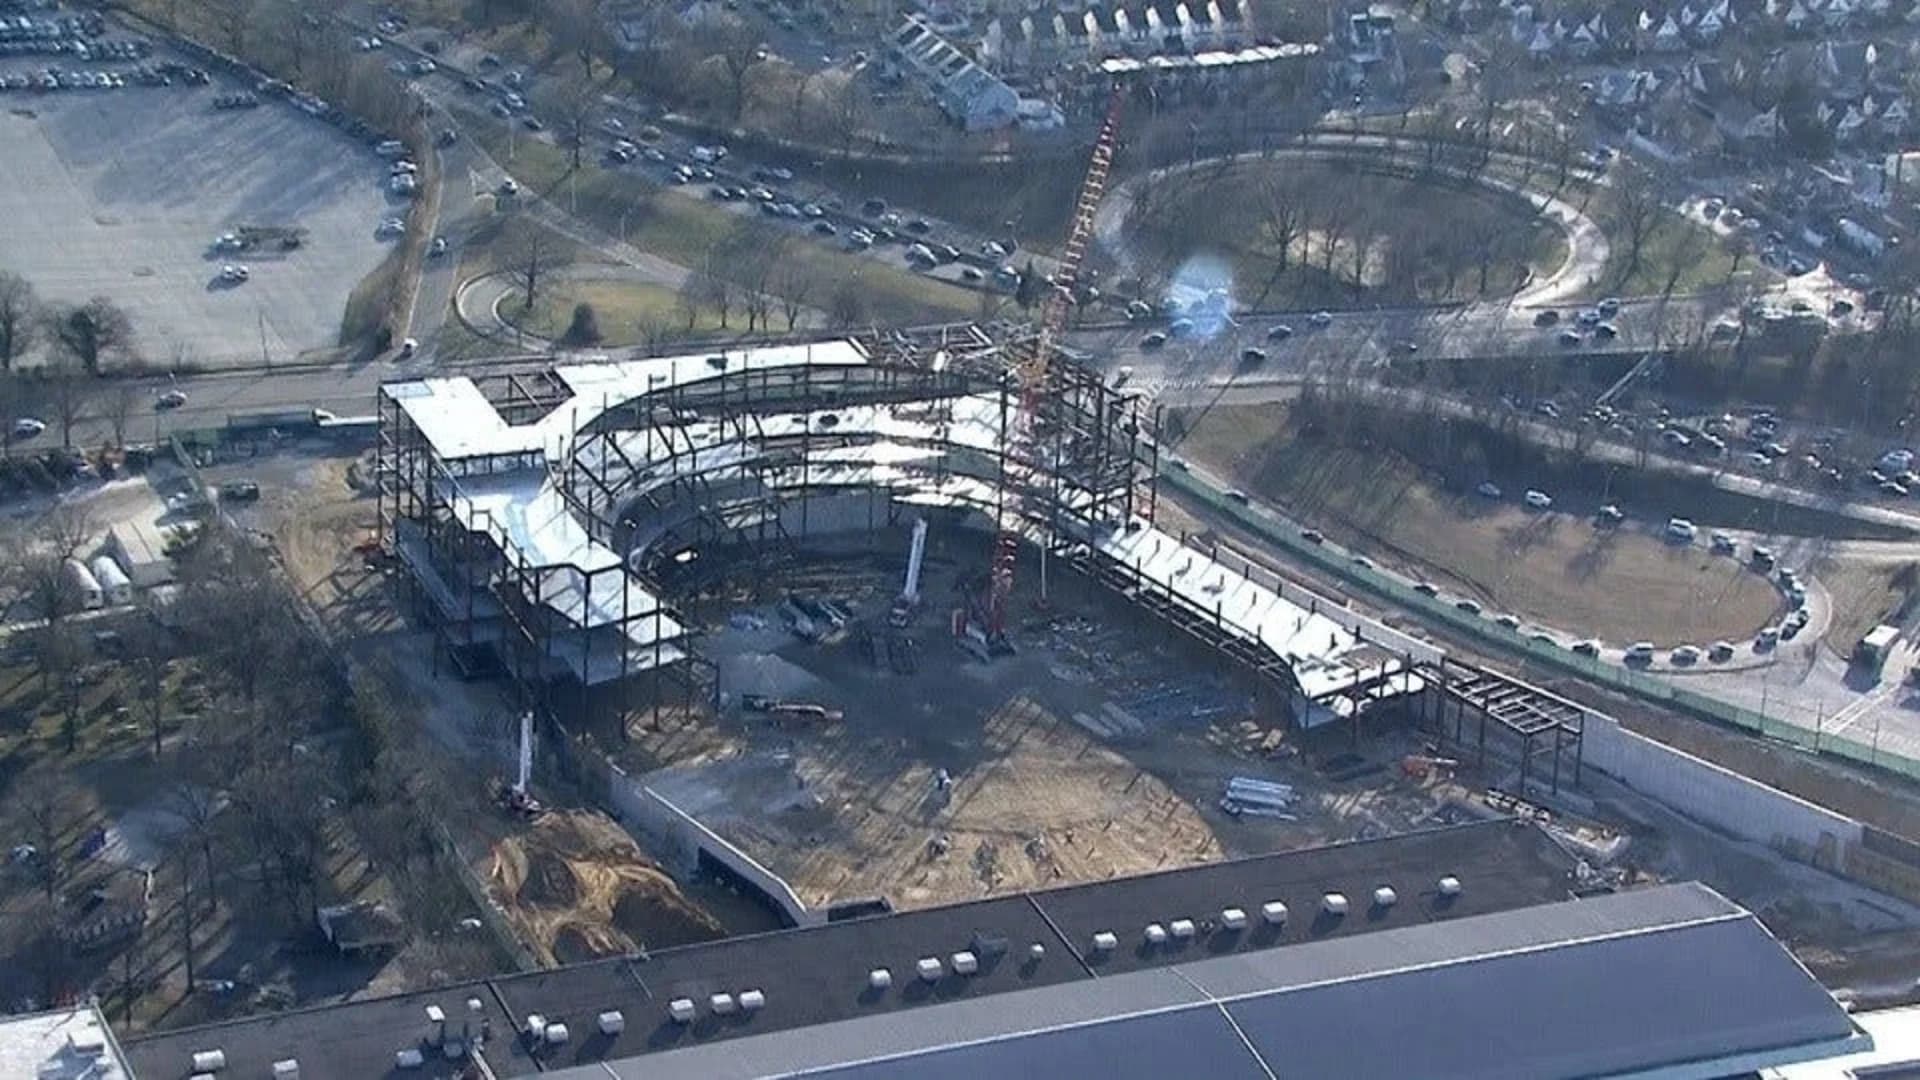 Work on Isles' new arena stopped due to Cuomo's stoppage of non-essential construction